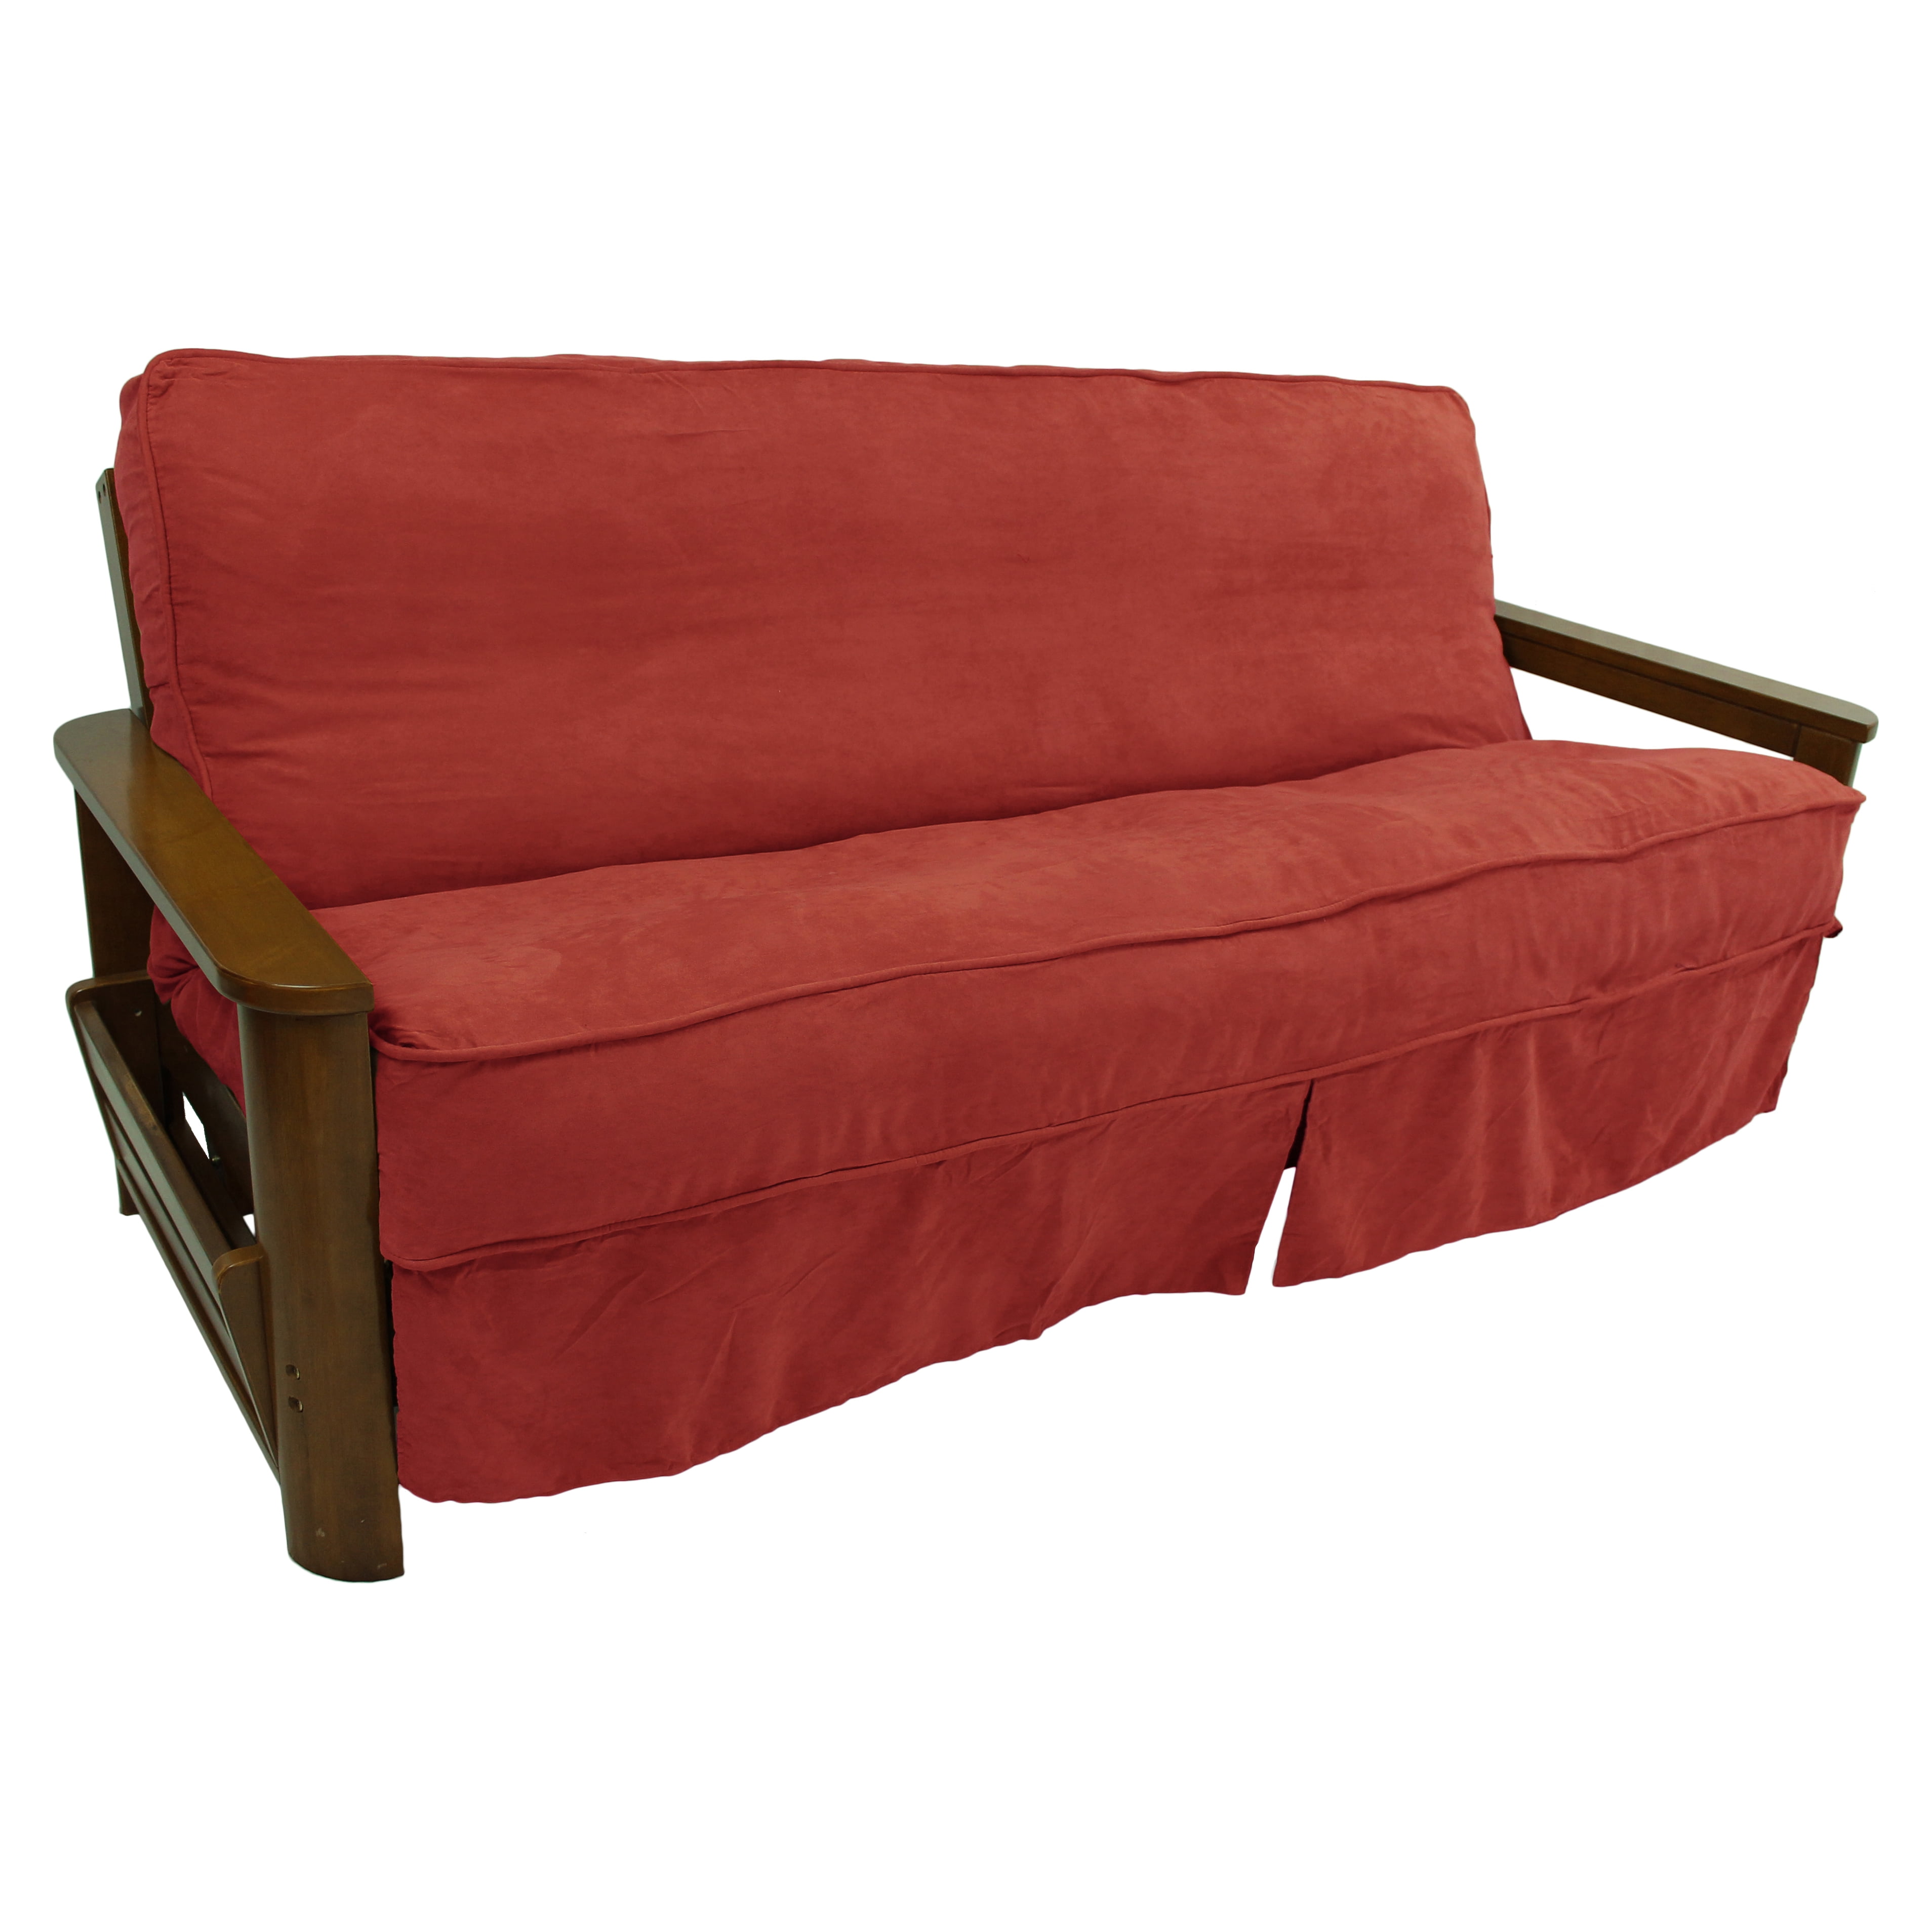 Picture of Blazing Needles 9670-CD-MS-CR 8 to 9 in. Solid Microsuede Double Corded Full Futon Slipcover, Cardinal Red